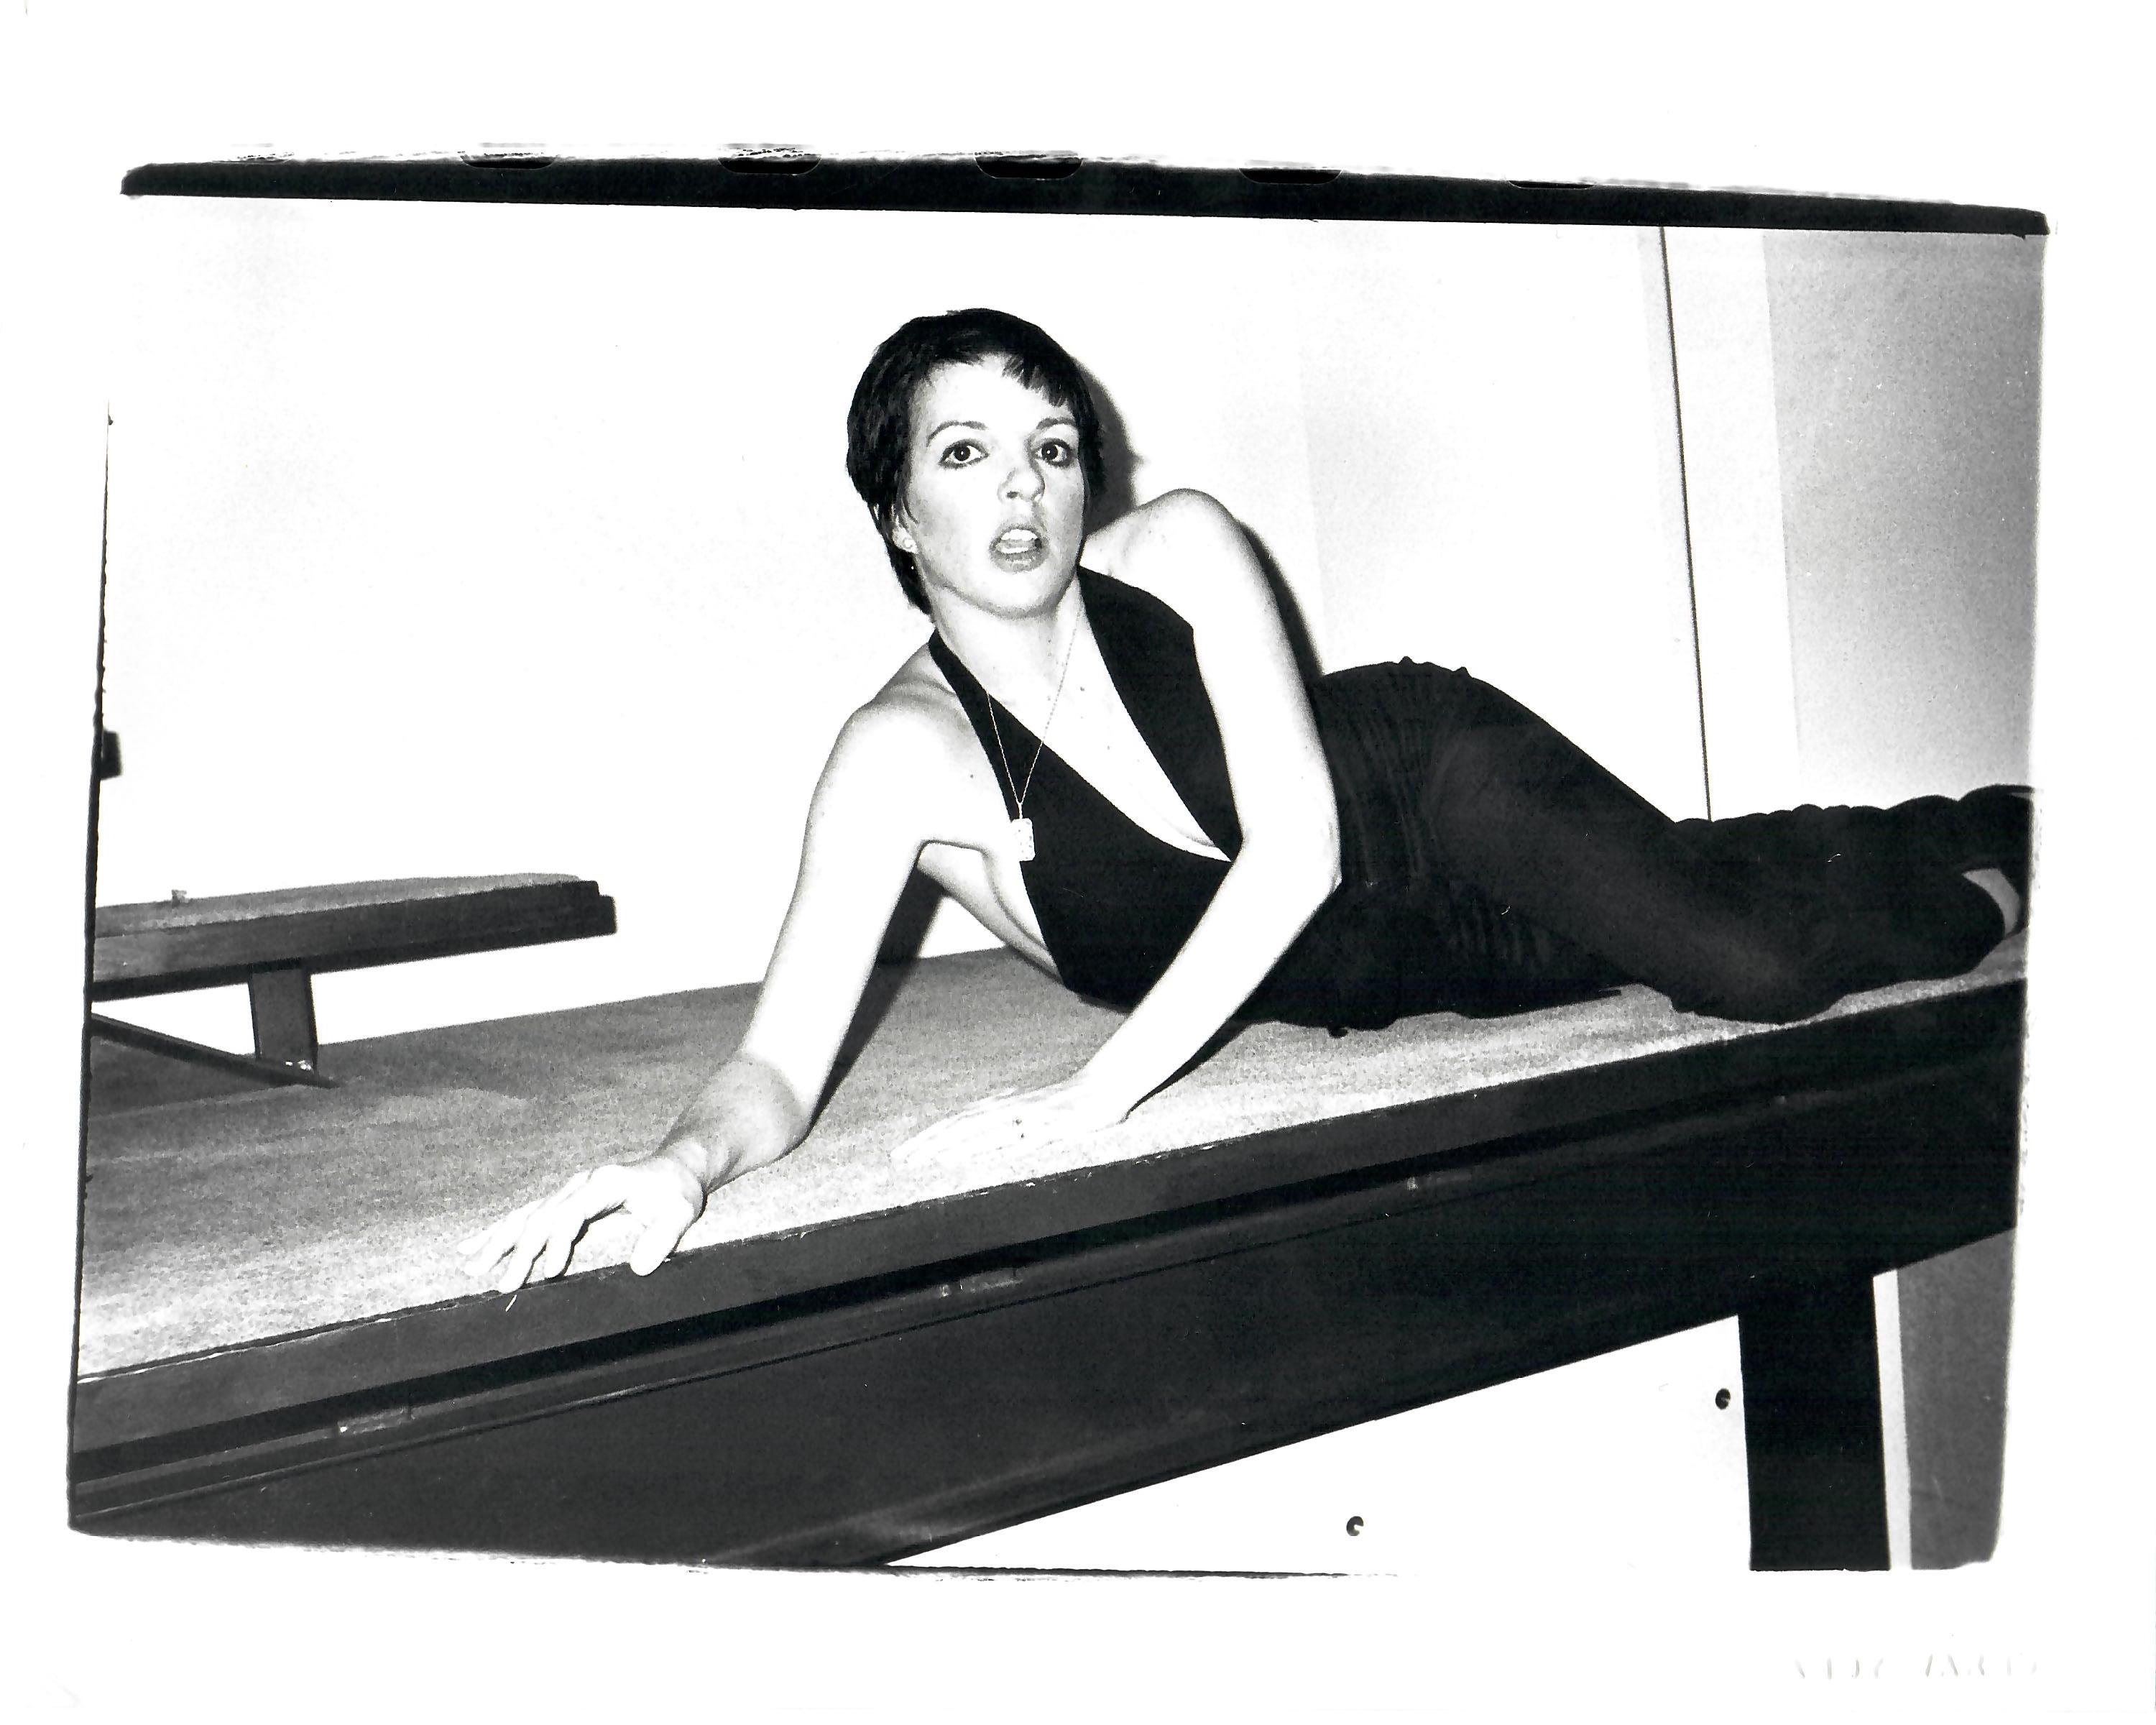 Andy Warhol Black and White Photograph - Liza Minnelli posing on floor of Halston's Apartment